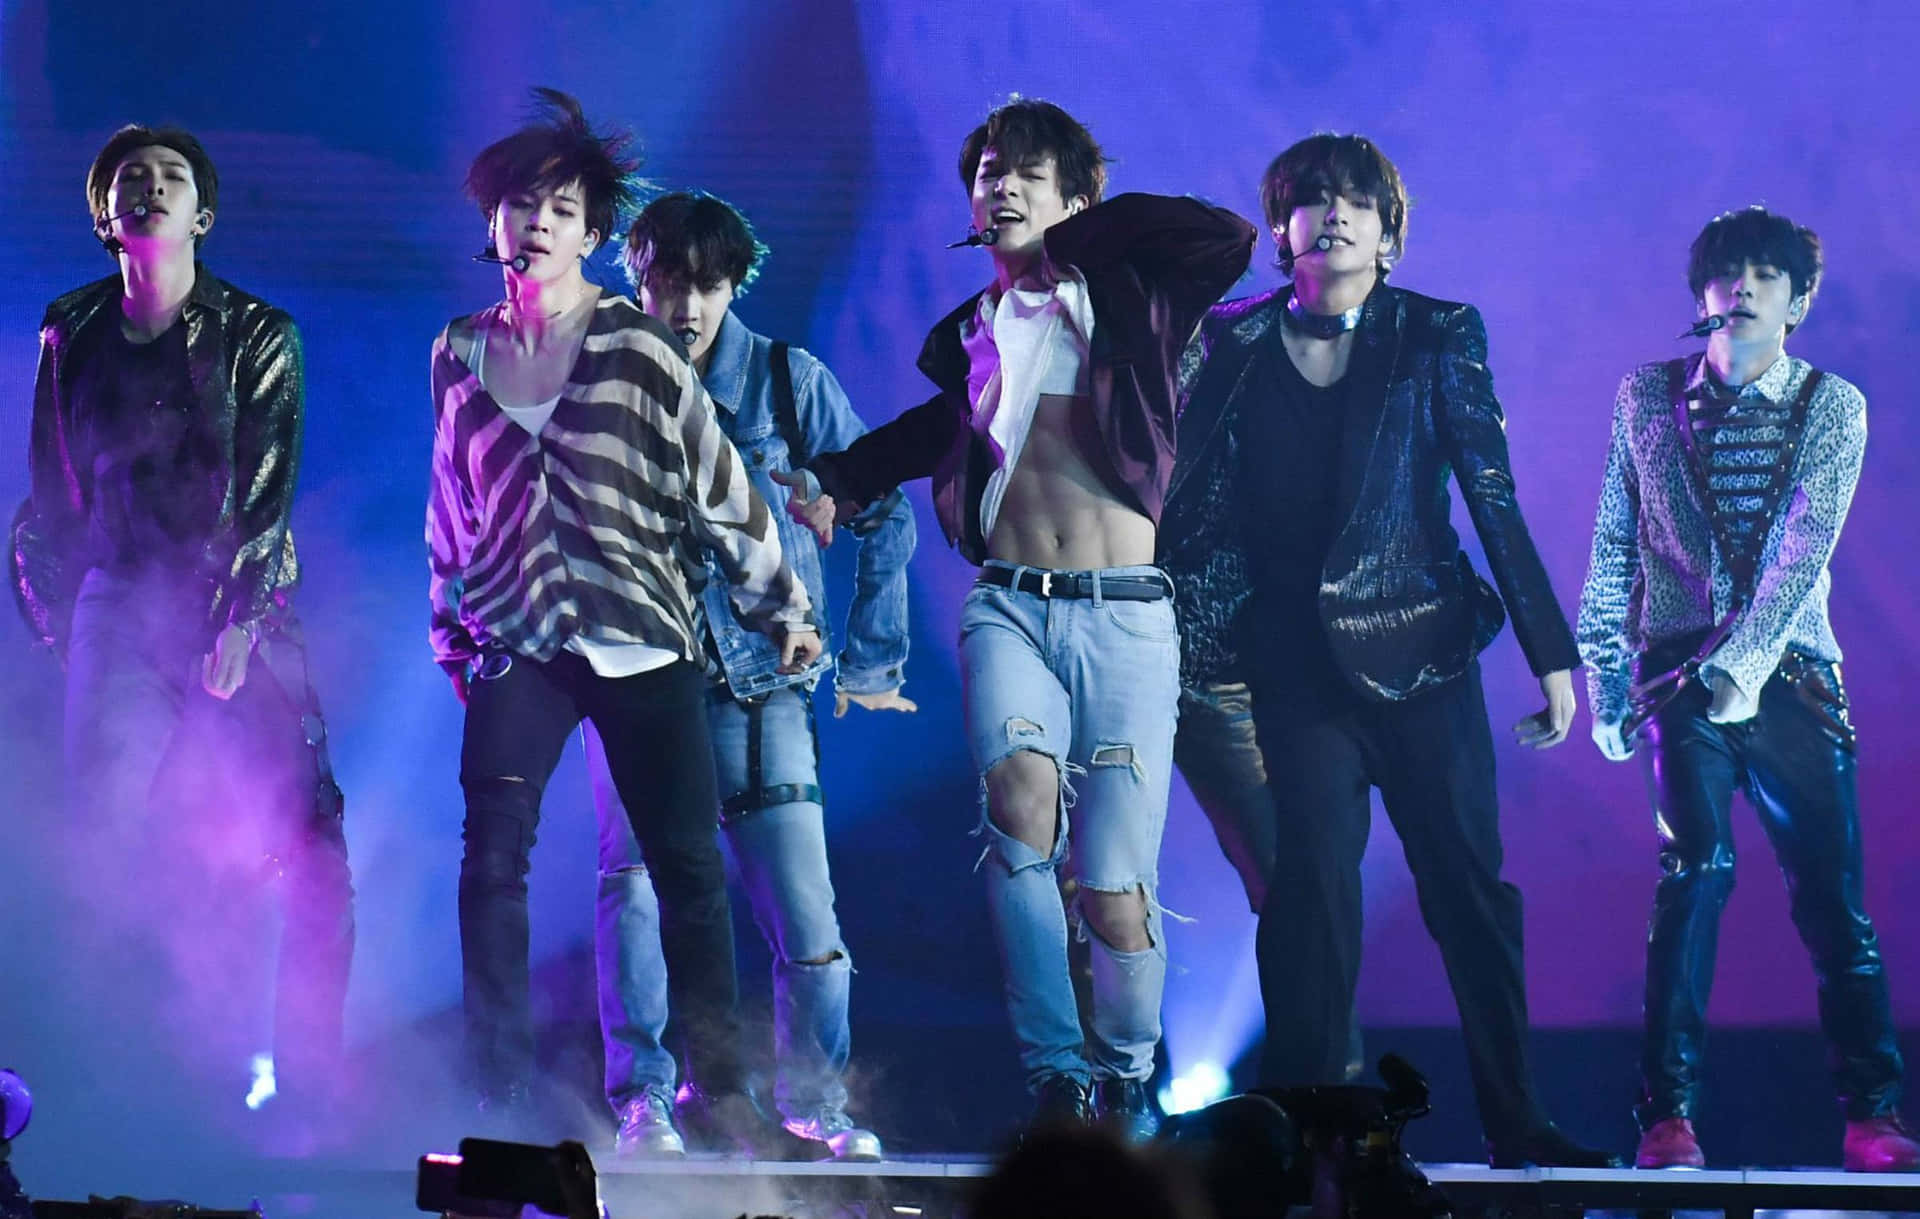 BTS amazes the crowd with an electrifying performance Wallpaper